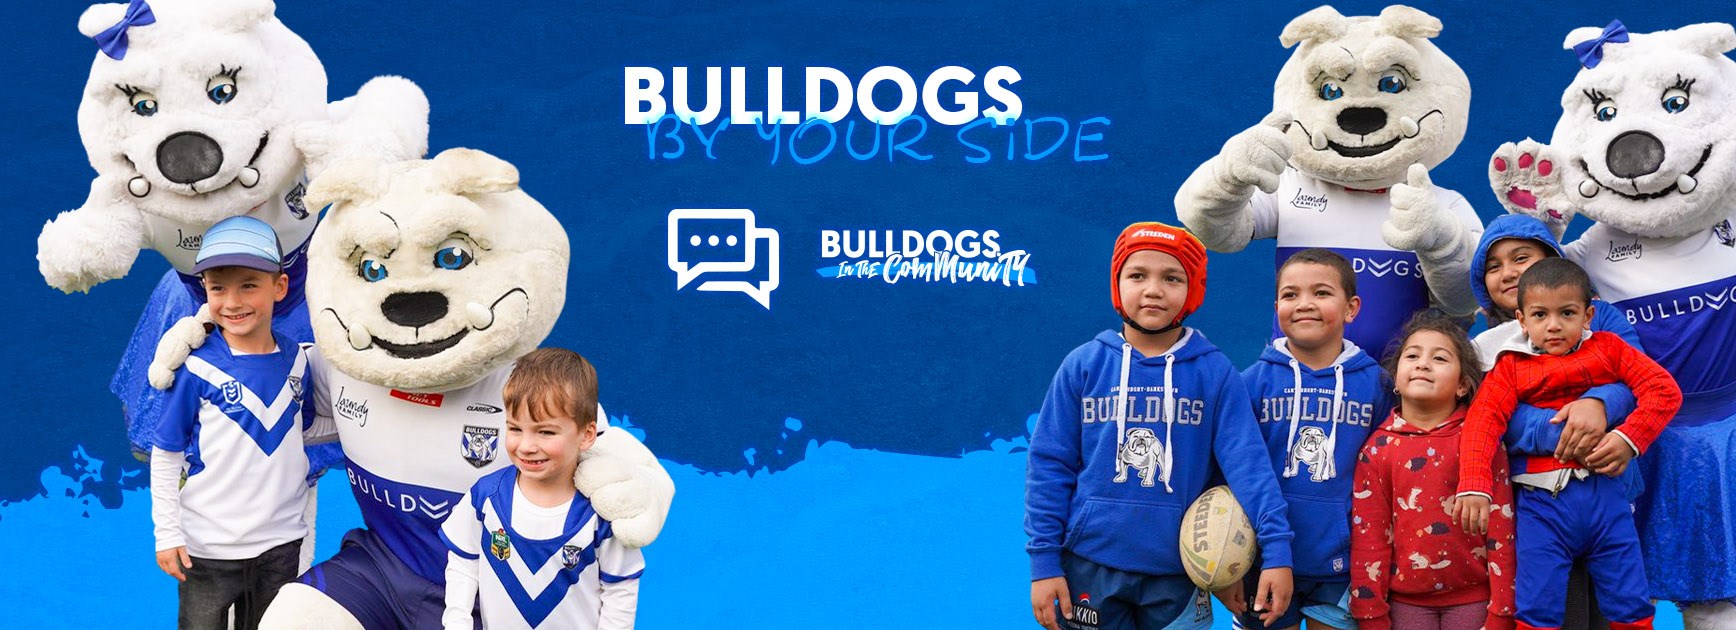 Bulldogs by Your Side